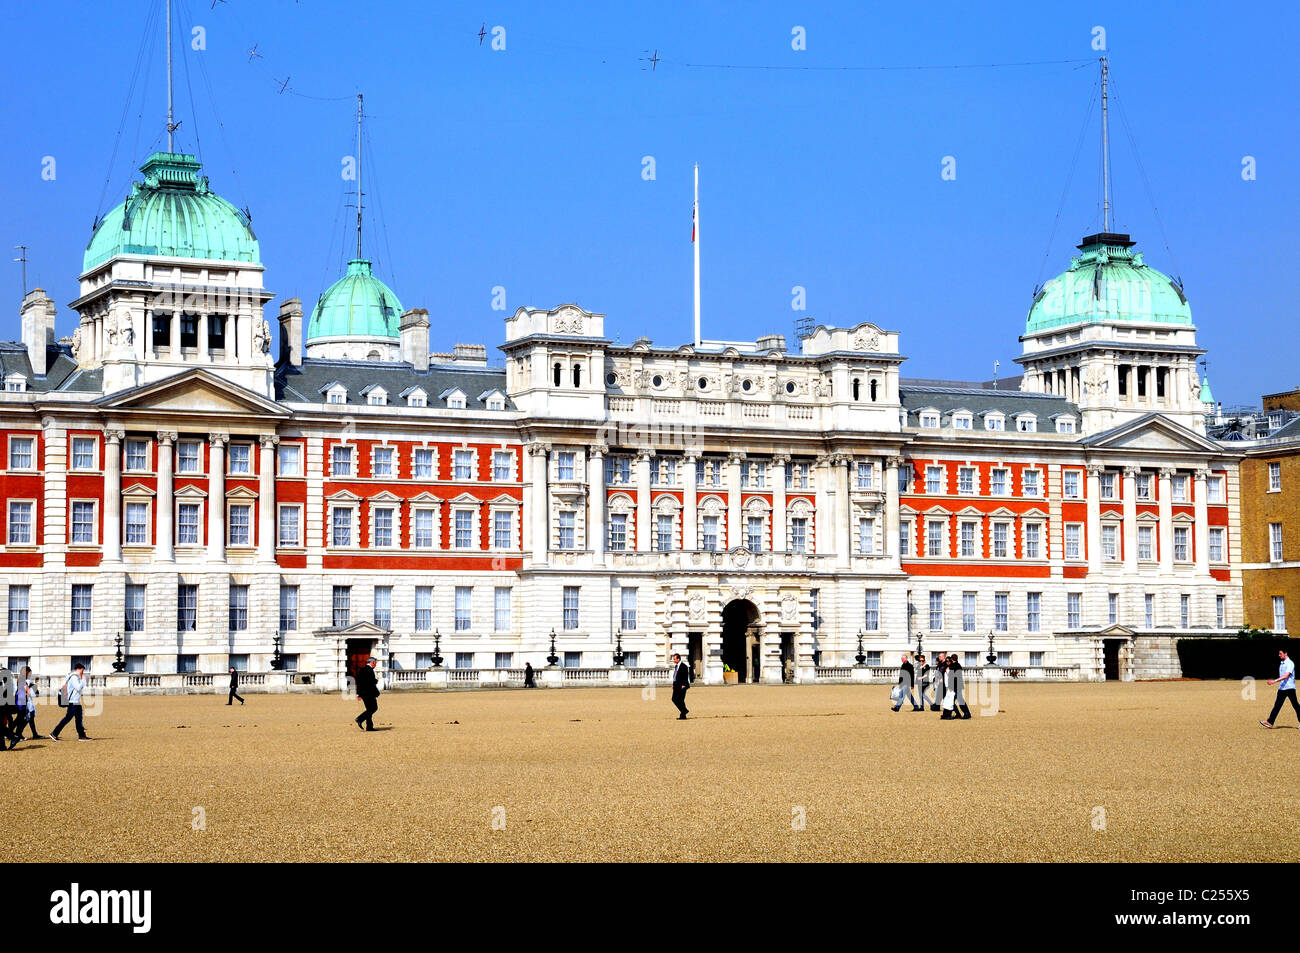 L'Admiralty Building Whitehall London Foto Stock